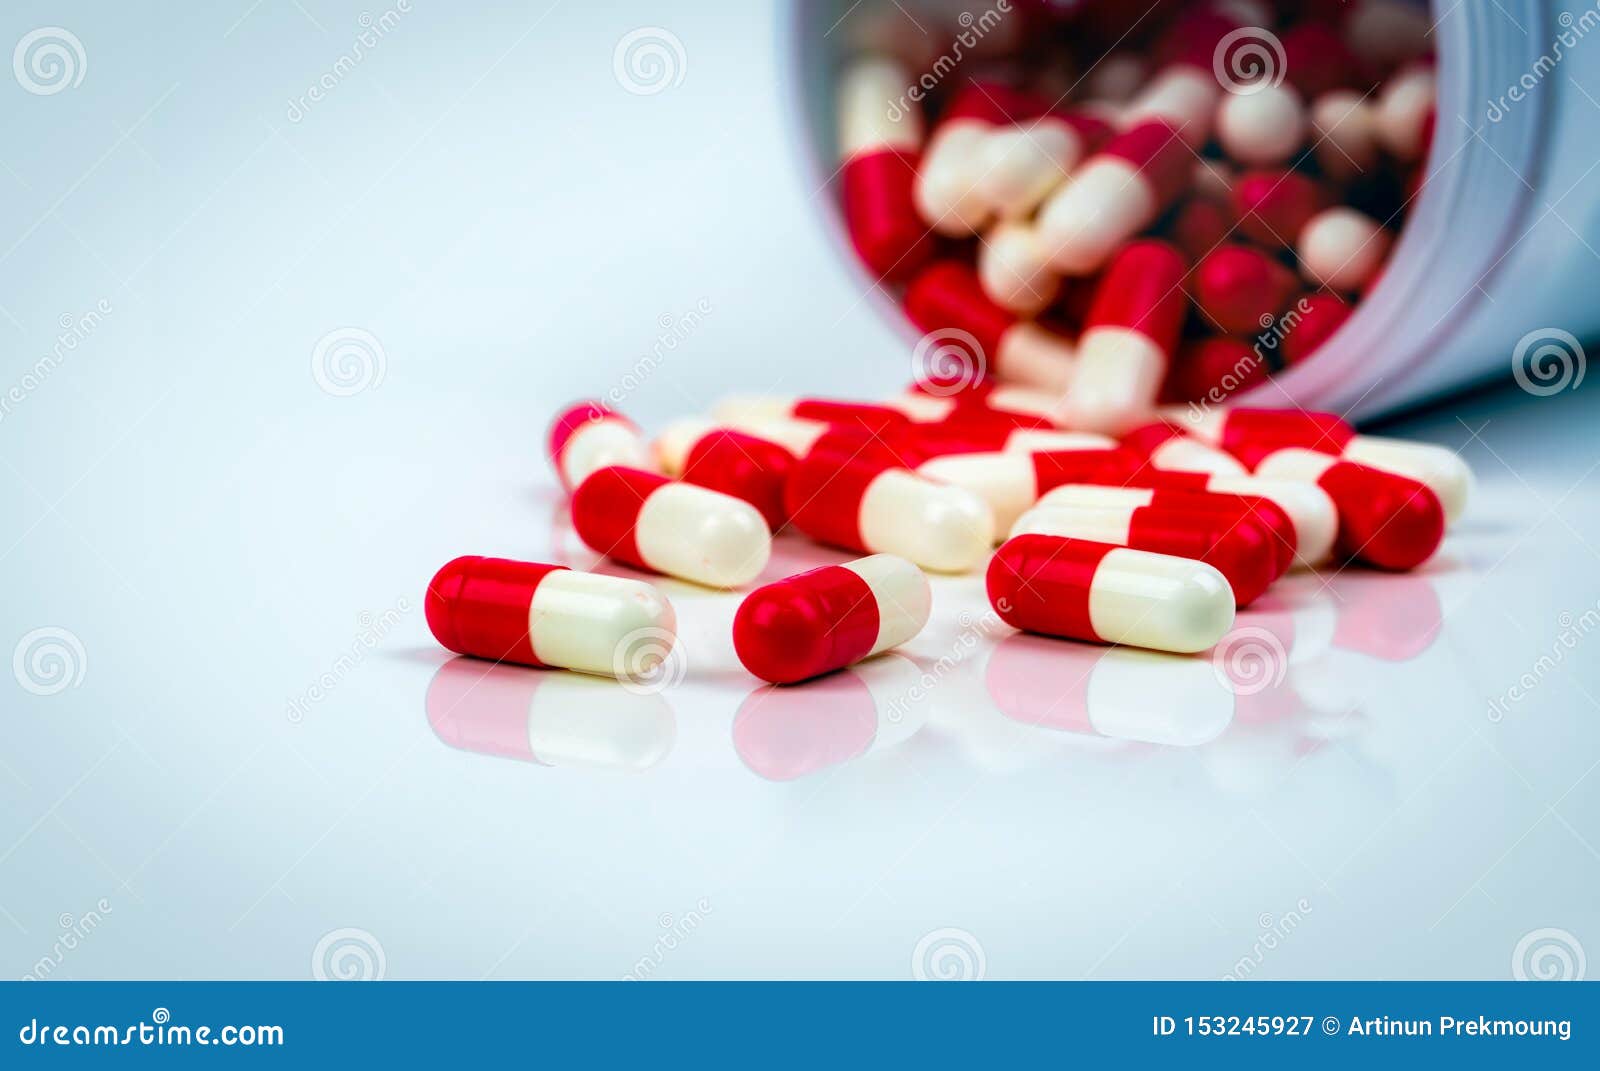 red-white capsule pills on white table on blurred background of drug bottle. antibiotics drug resistance. antimicrobial capsule